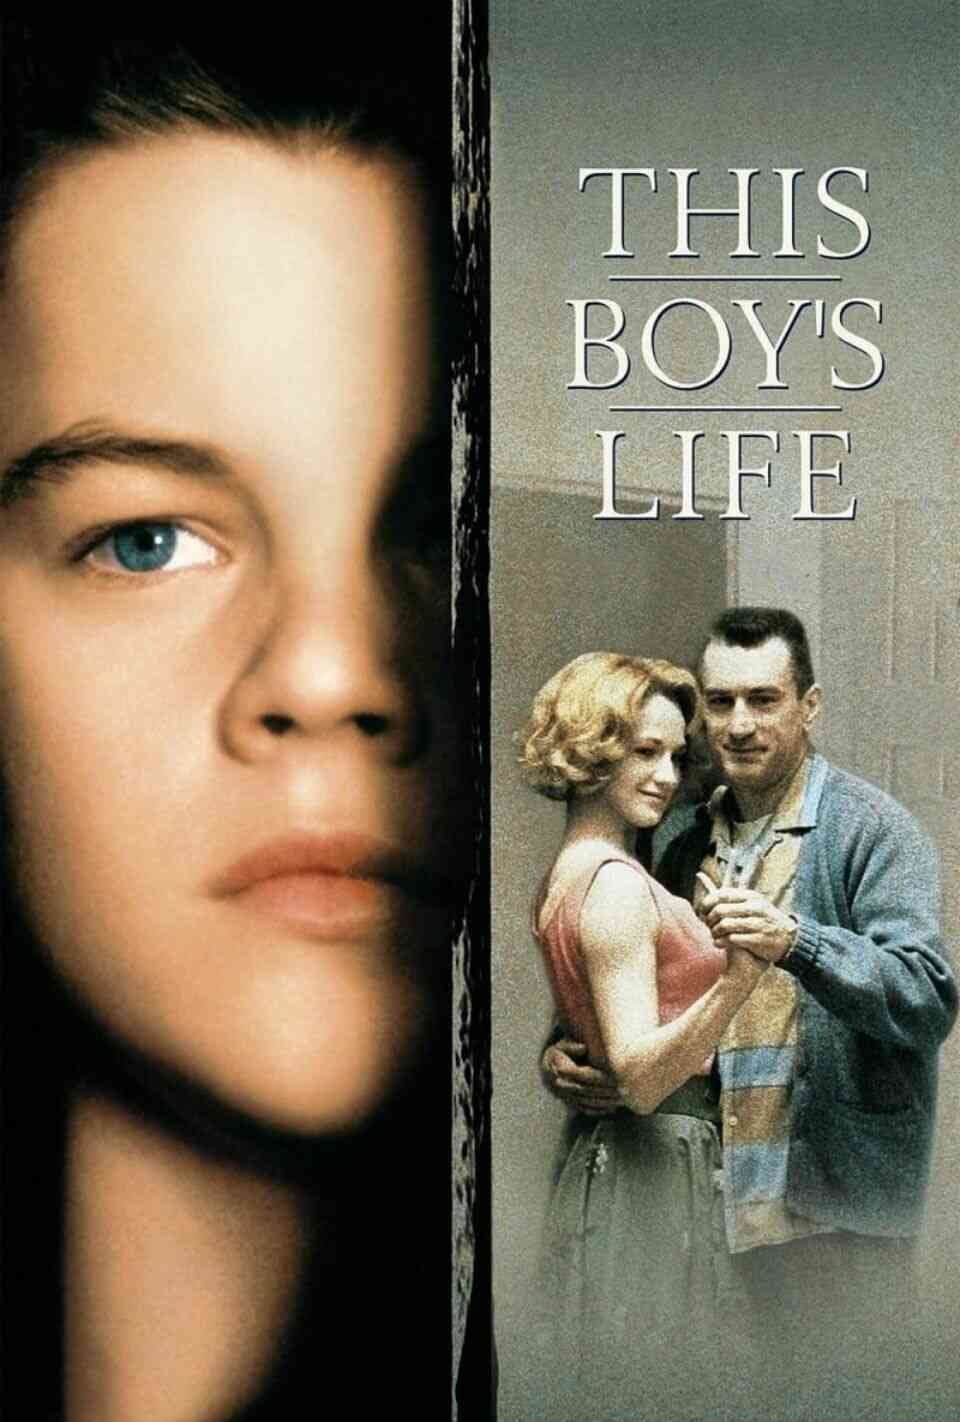 Read This Boy's Life screenplay (poster)